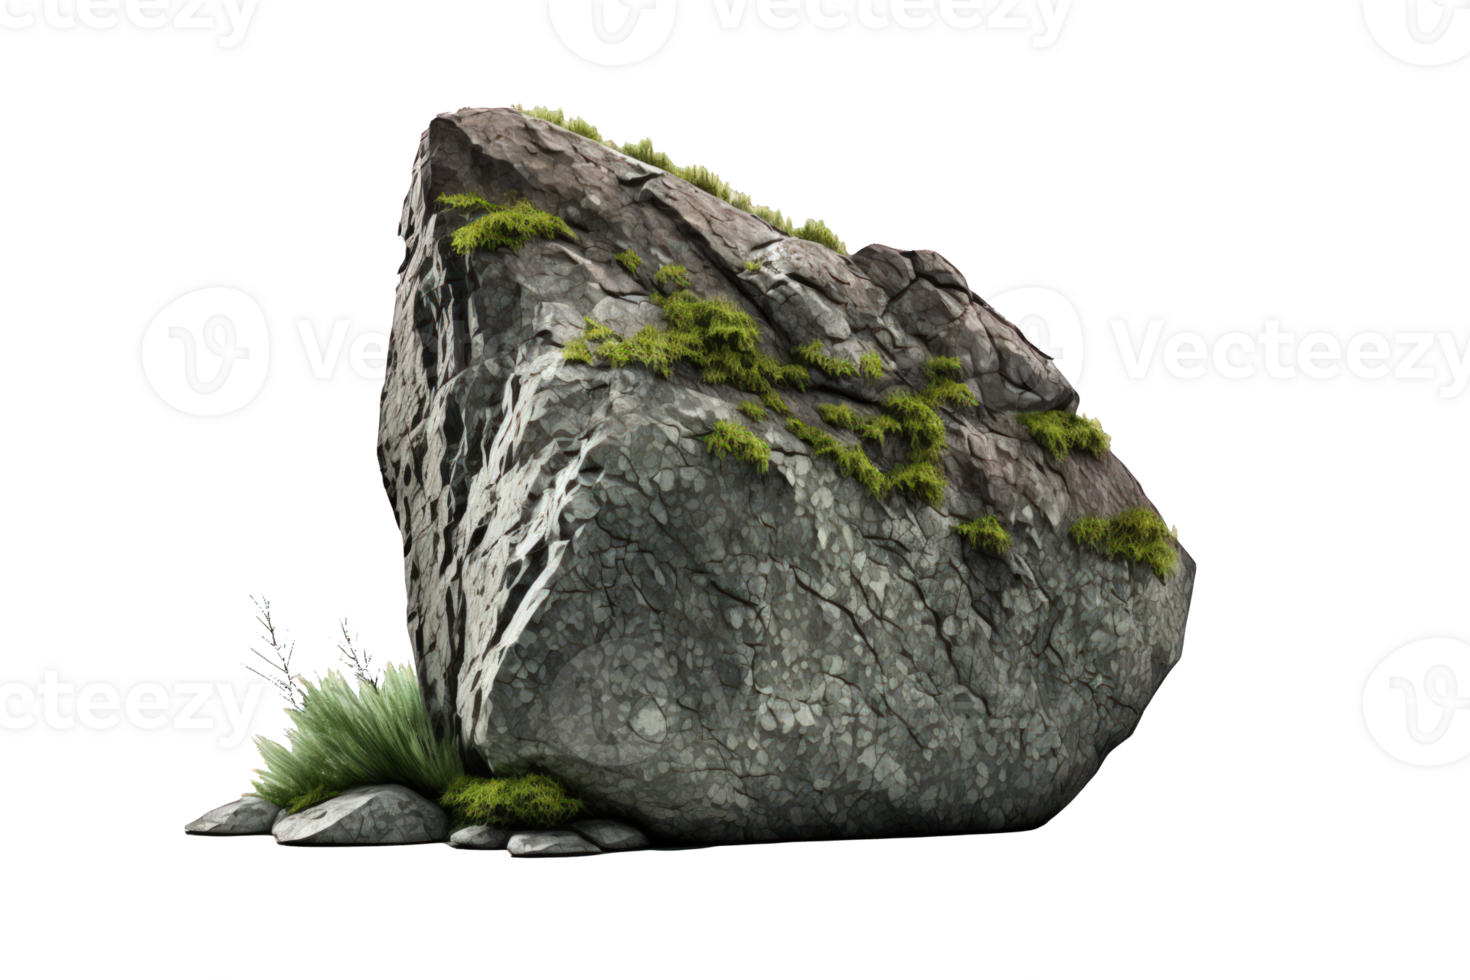 The image depicts a lifelike stone formation found in nature, with intricate details and textures, set against a transparent background. png